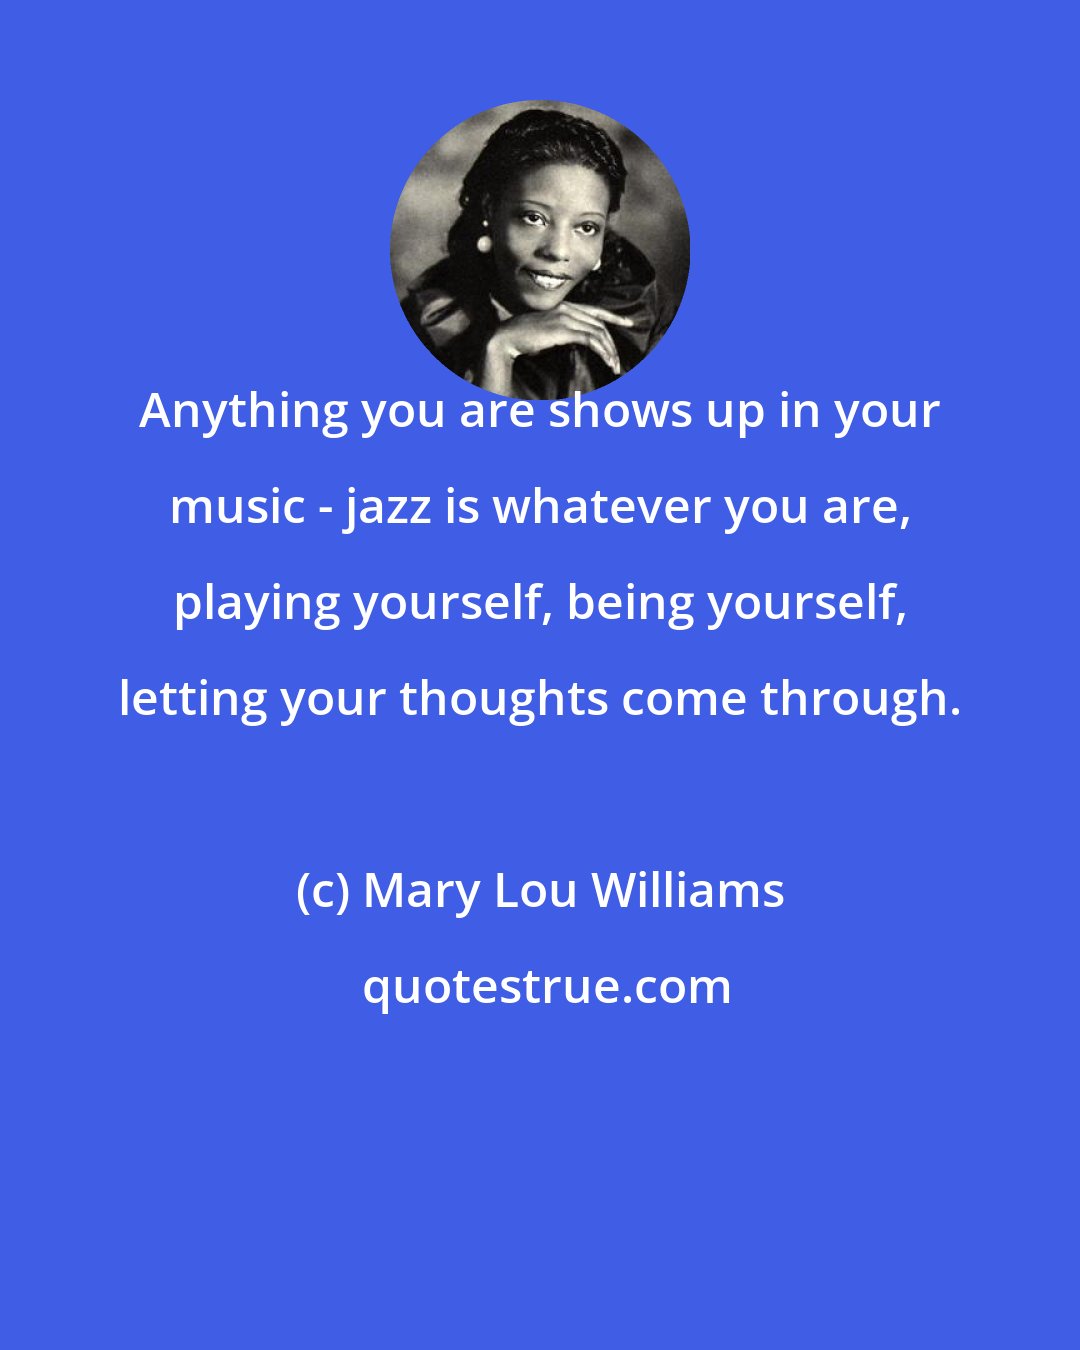 Mary Lou Williams: Anything you are shows up in your music - jazz is whatever you are, playing yourself, being yourself, letting your thoughts come through.